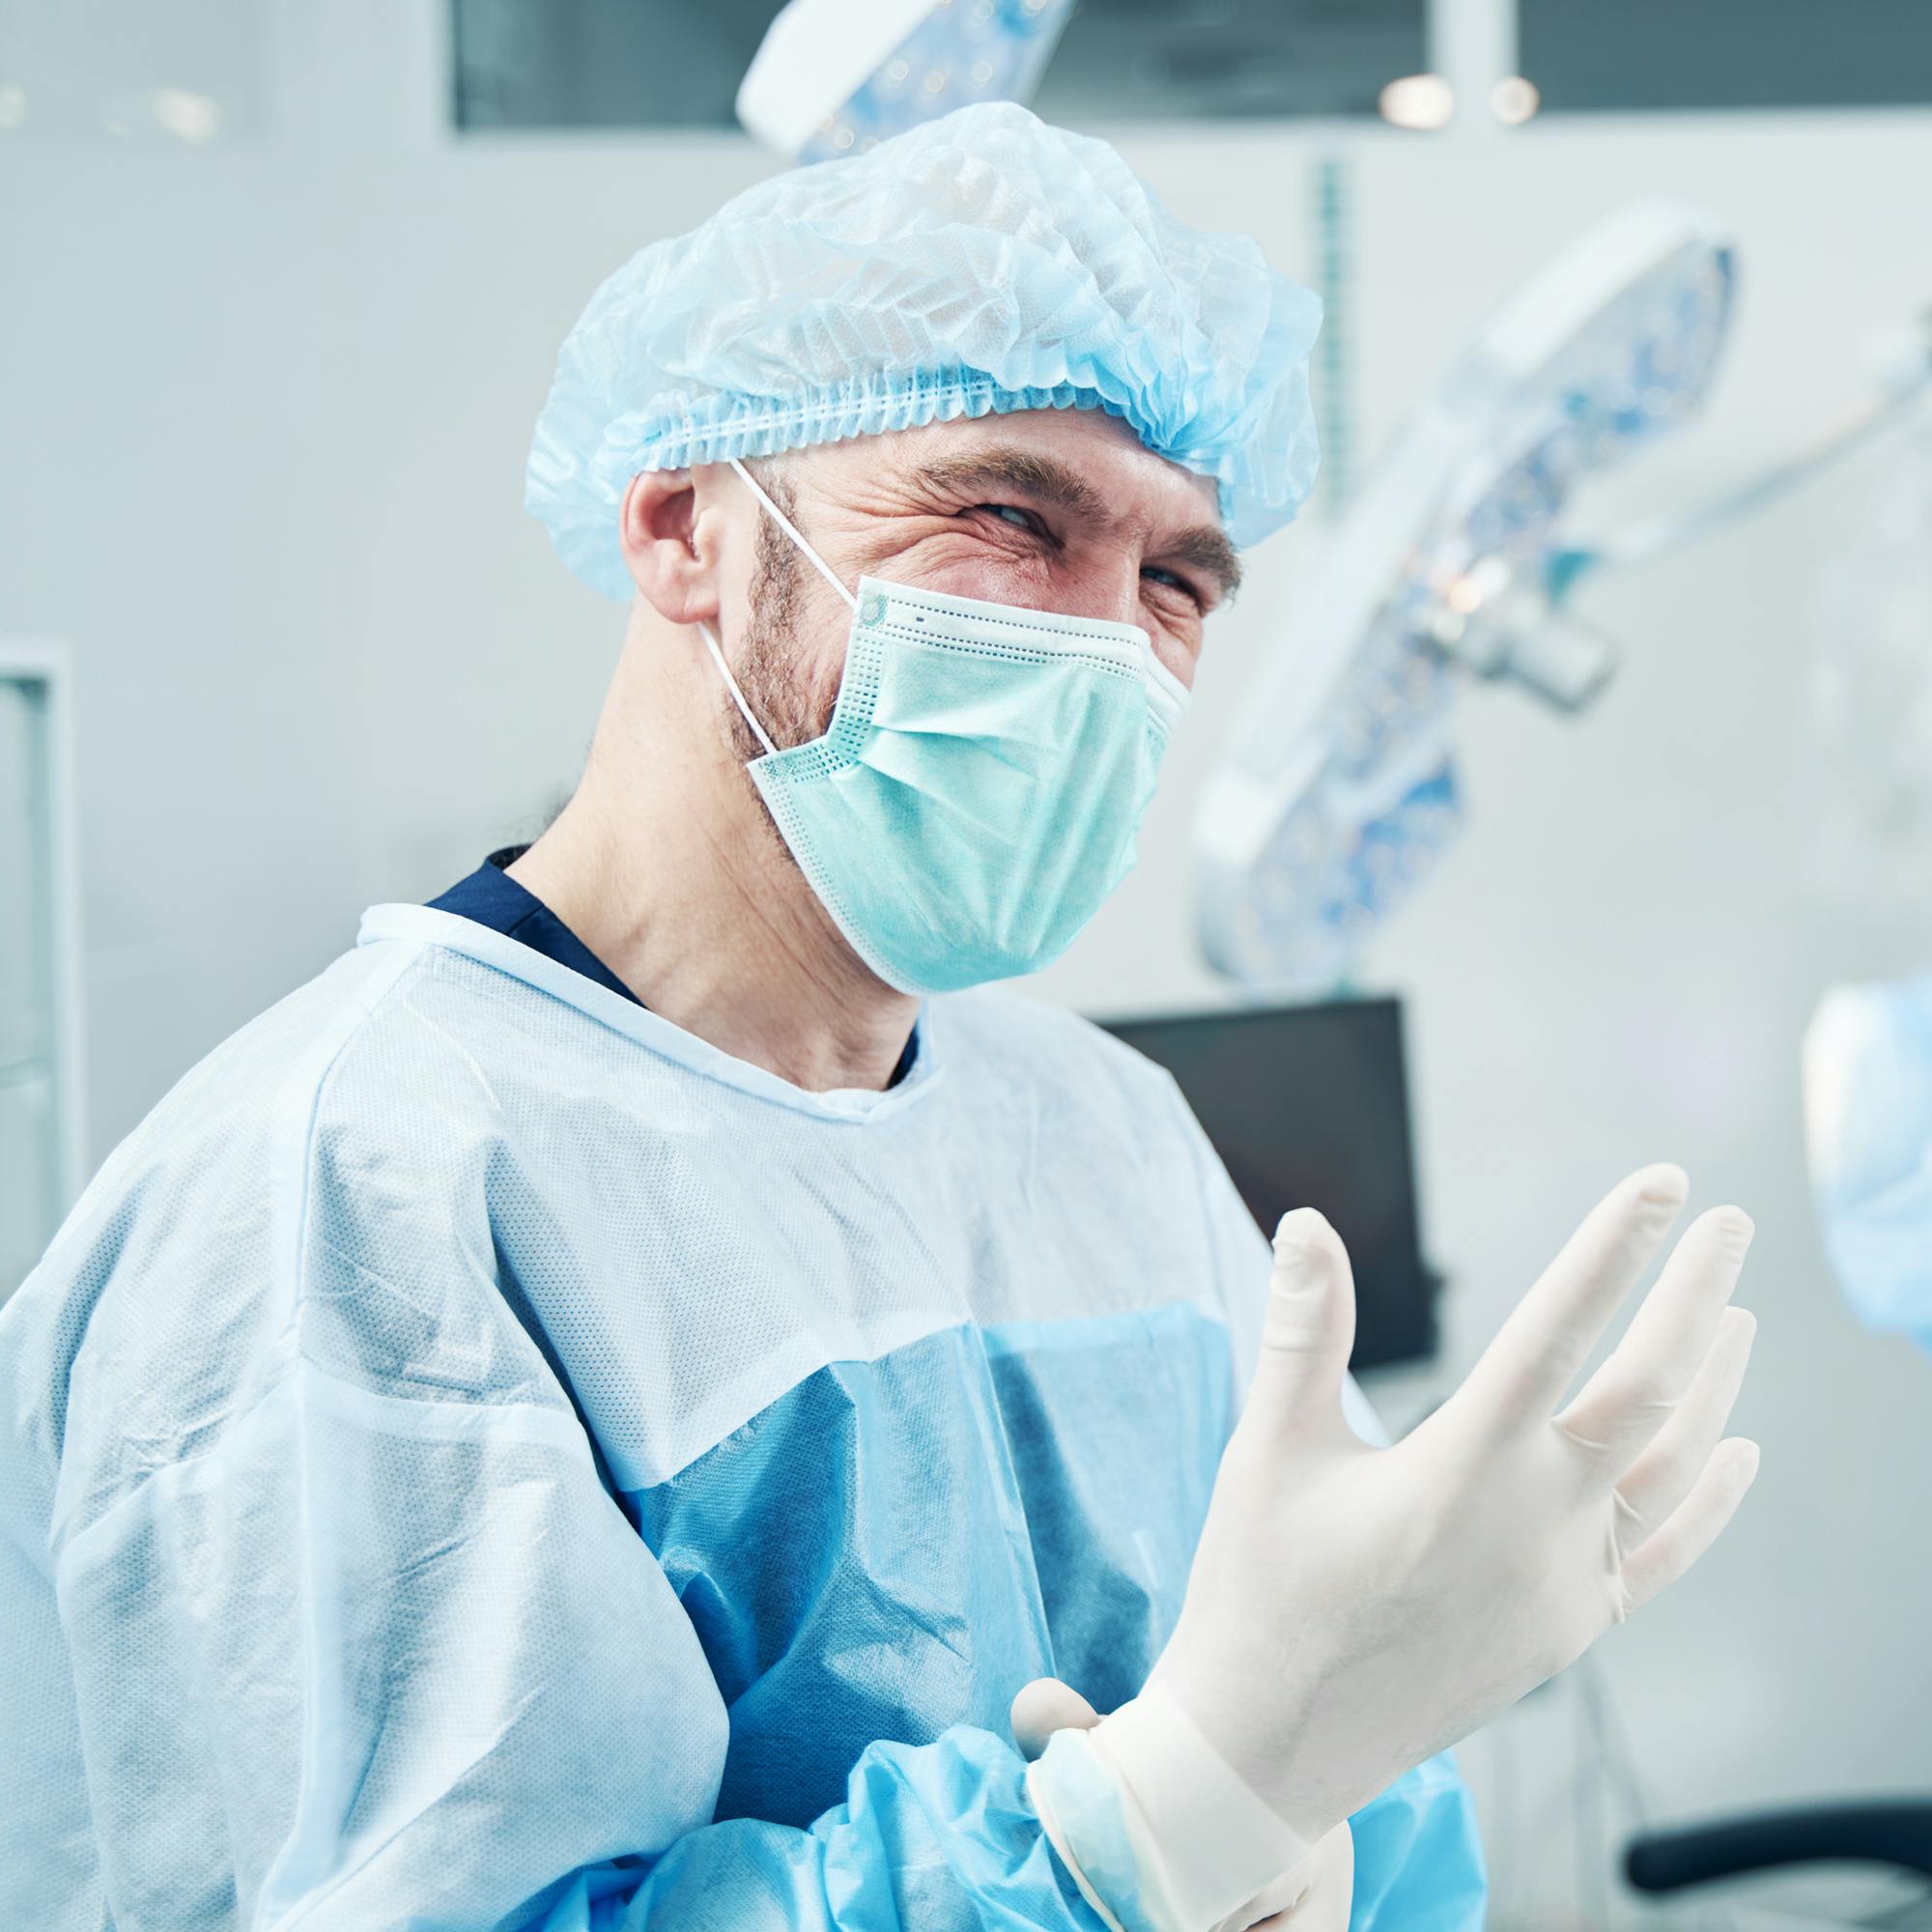 man in surgical outfit smiling in operating room